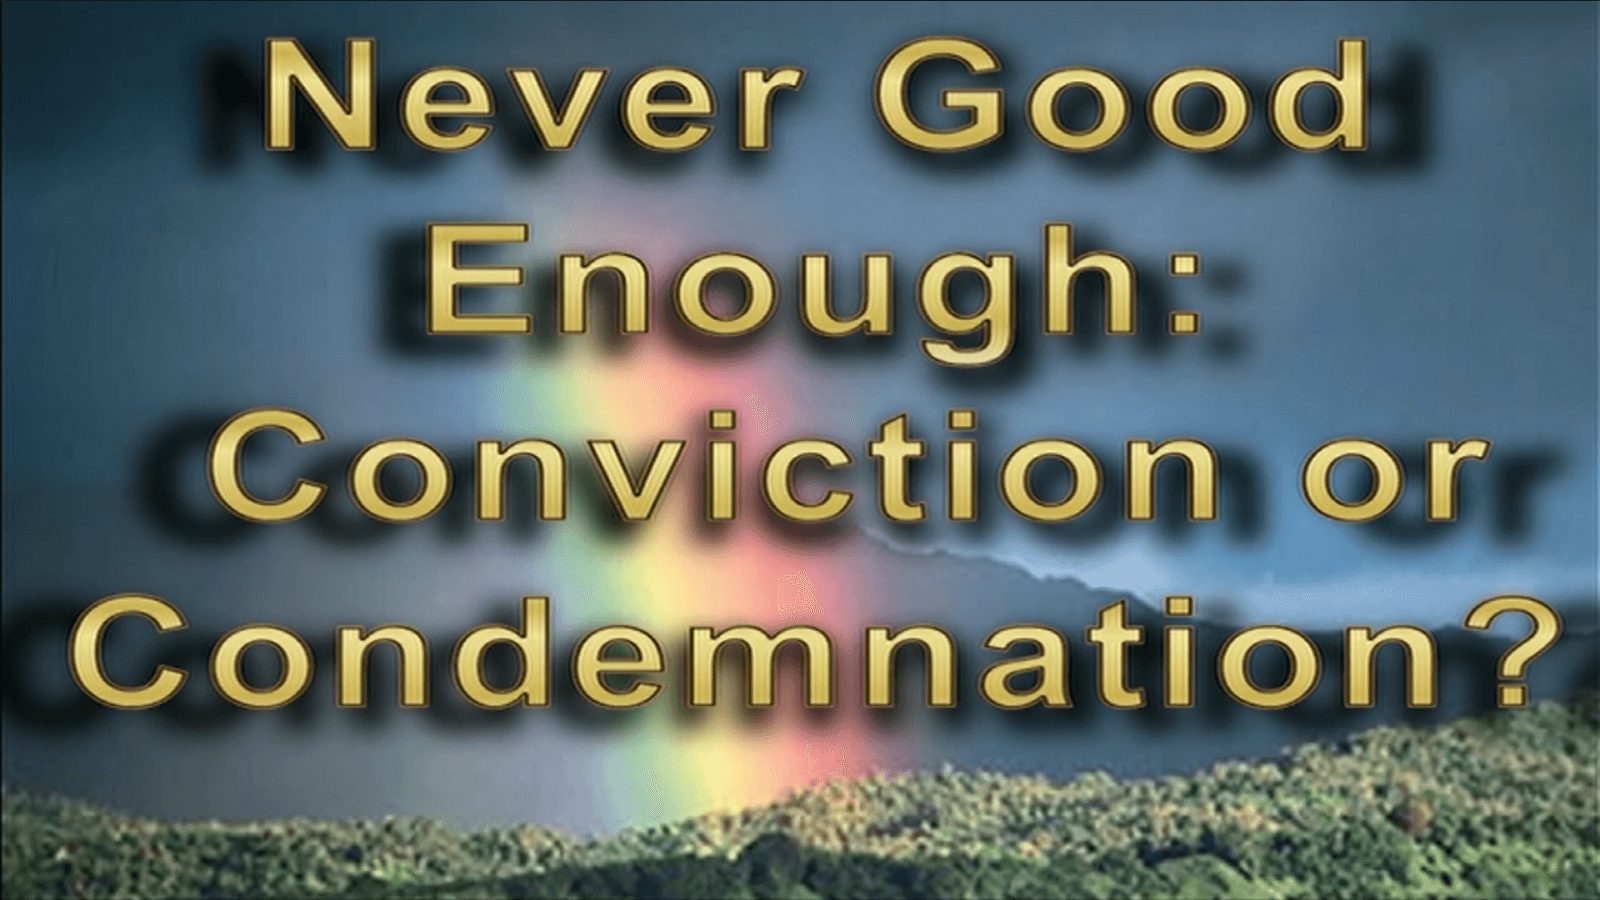 Never Good Enough: Conviction or Condemnation?